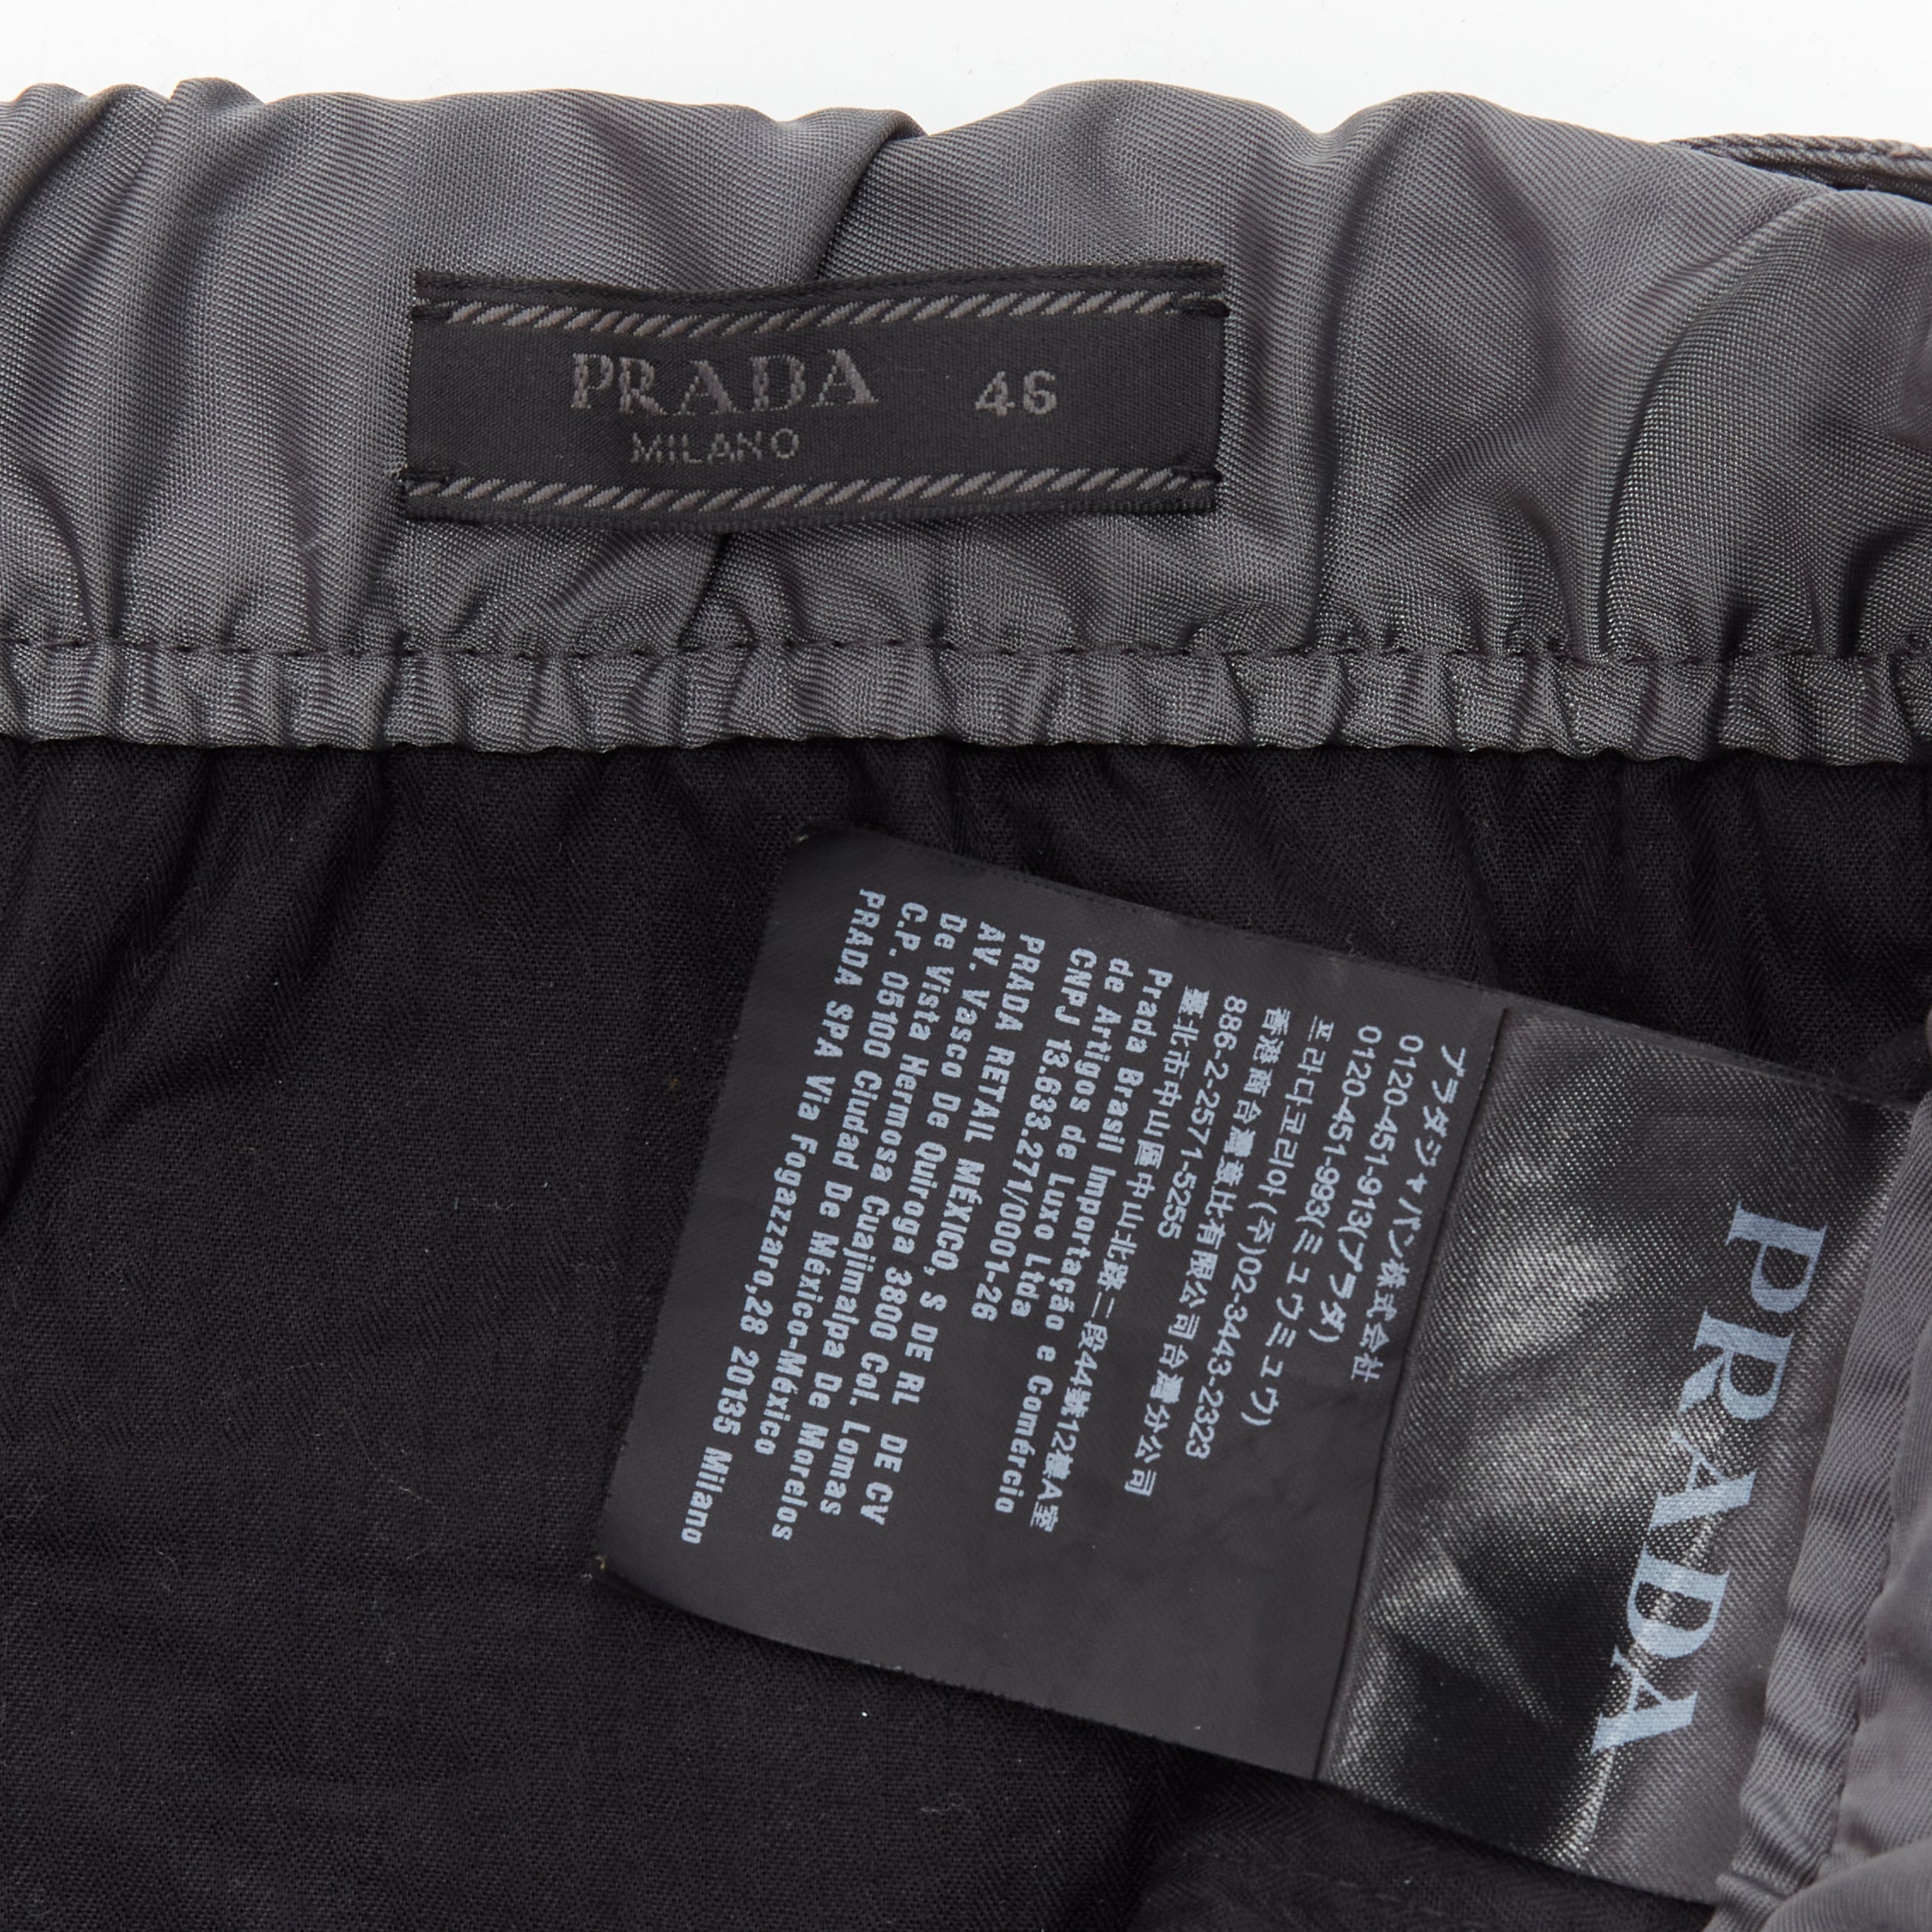 100% Authenticity Guaranteed Prada Grey Nylon Pants on Sale. Available at  JHROP jhrop_official